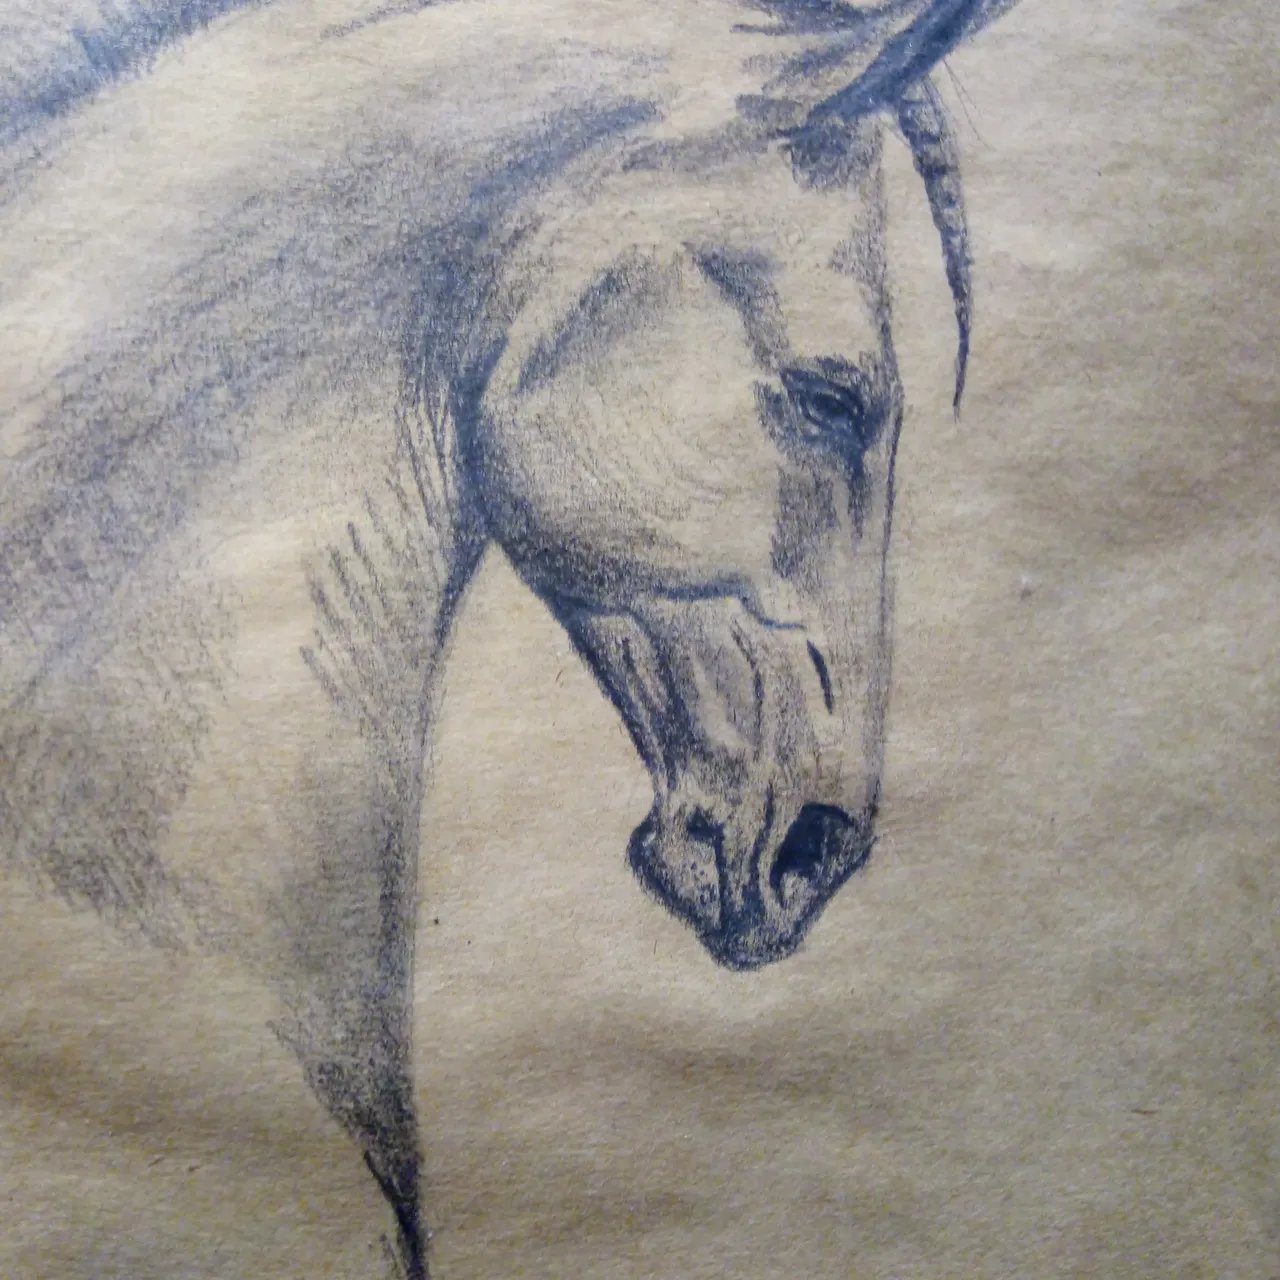 How to draw a running horse - Pencil shading - YouTube